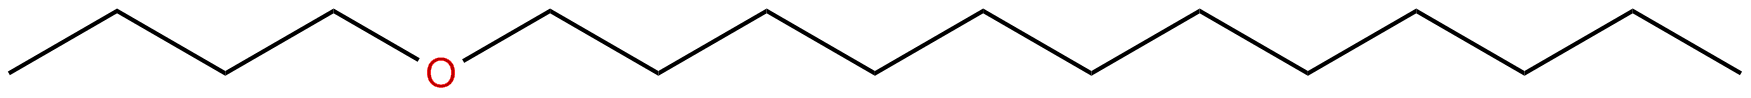 Image of butyl dodecyl ether